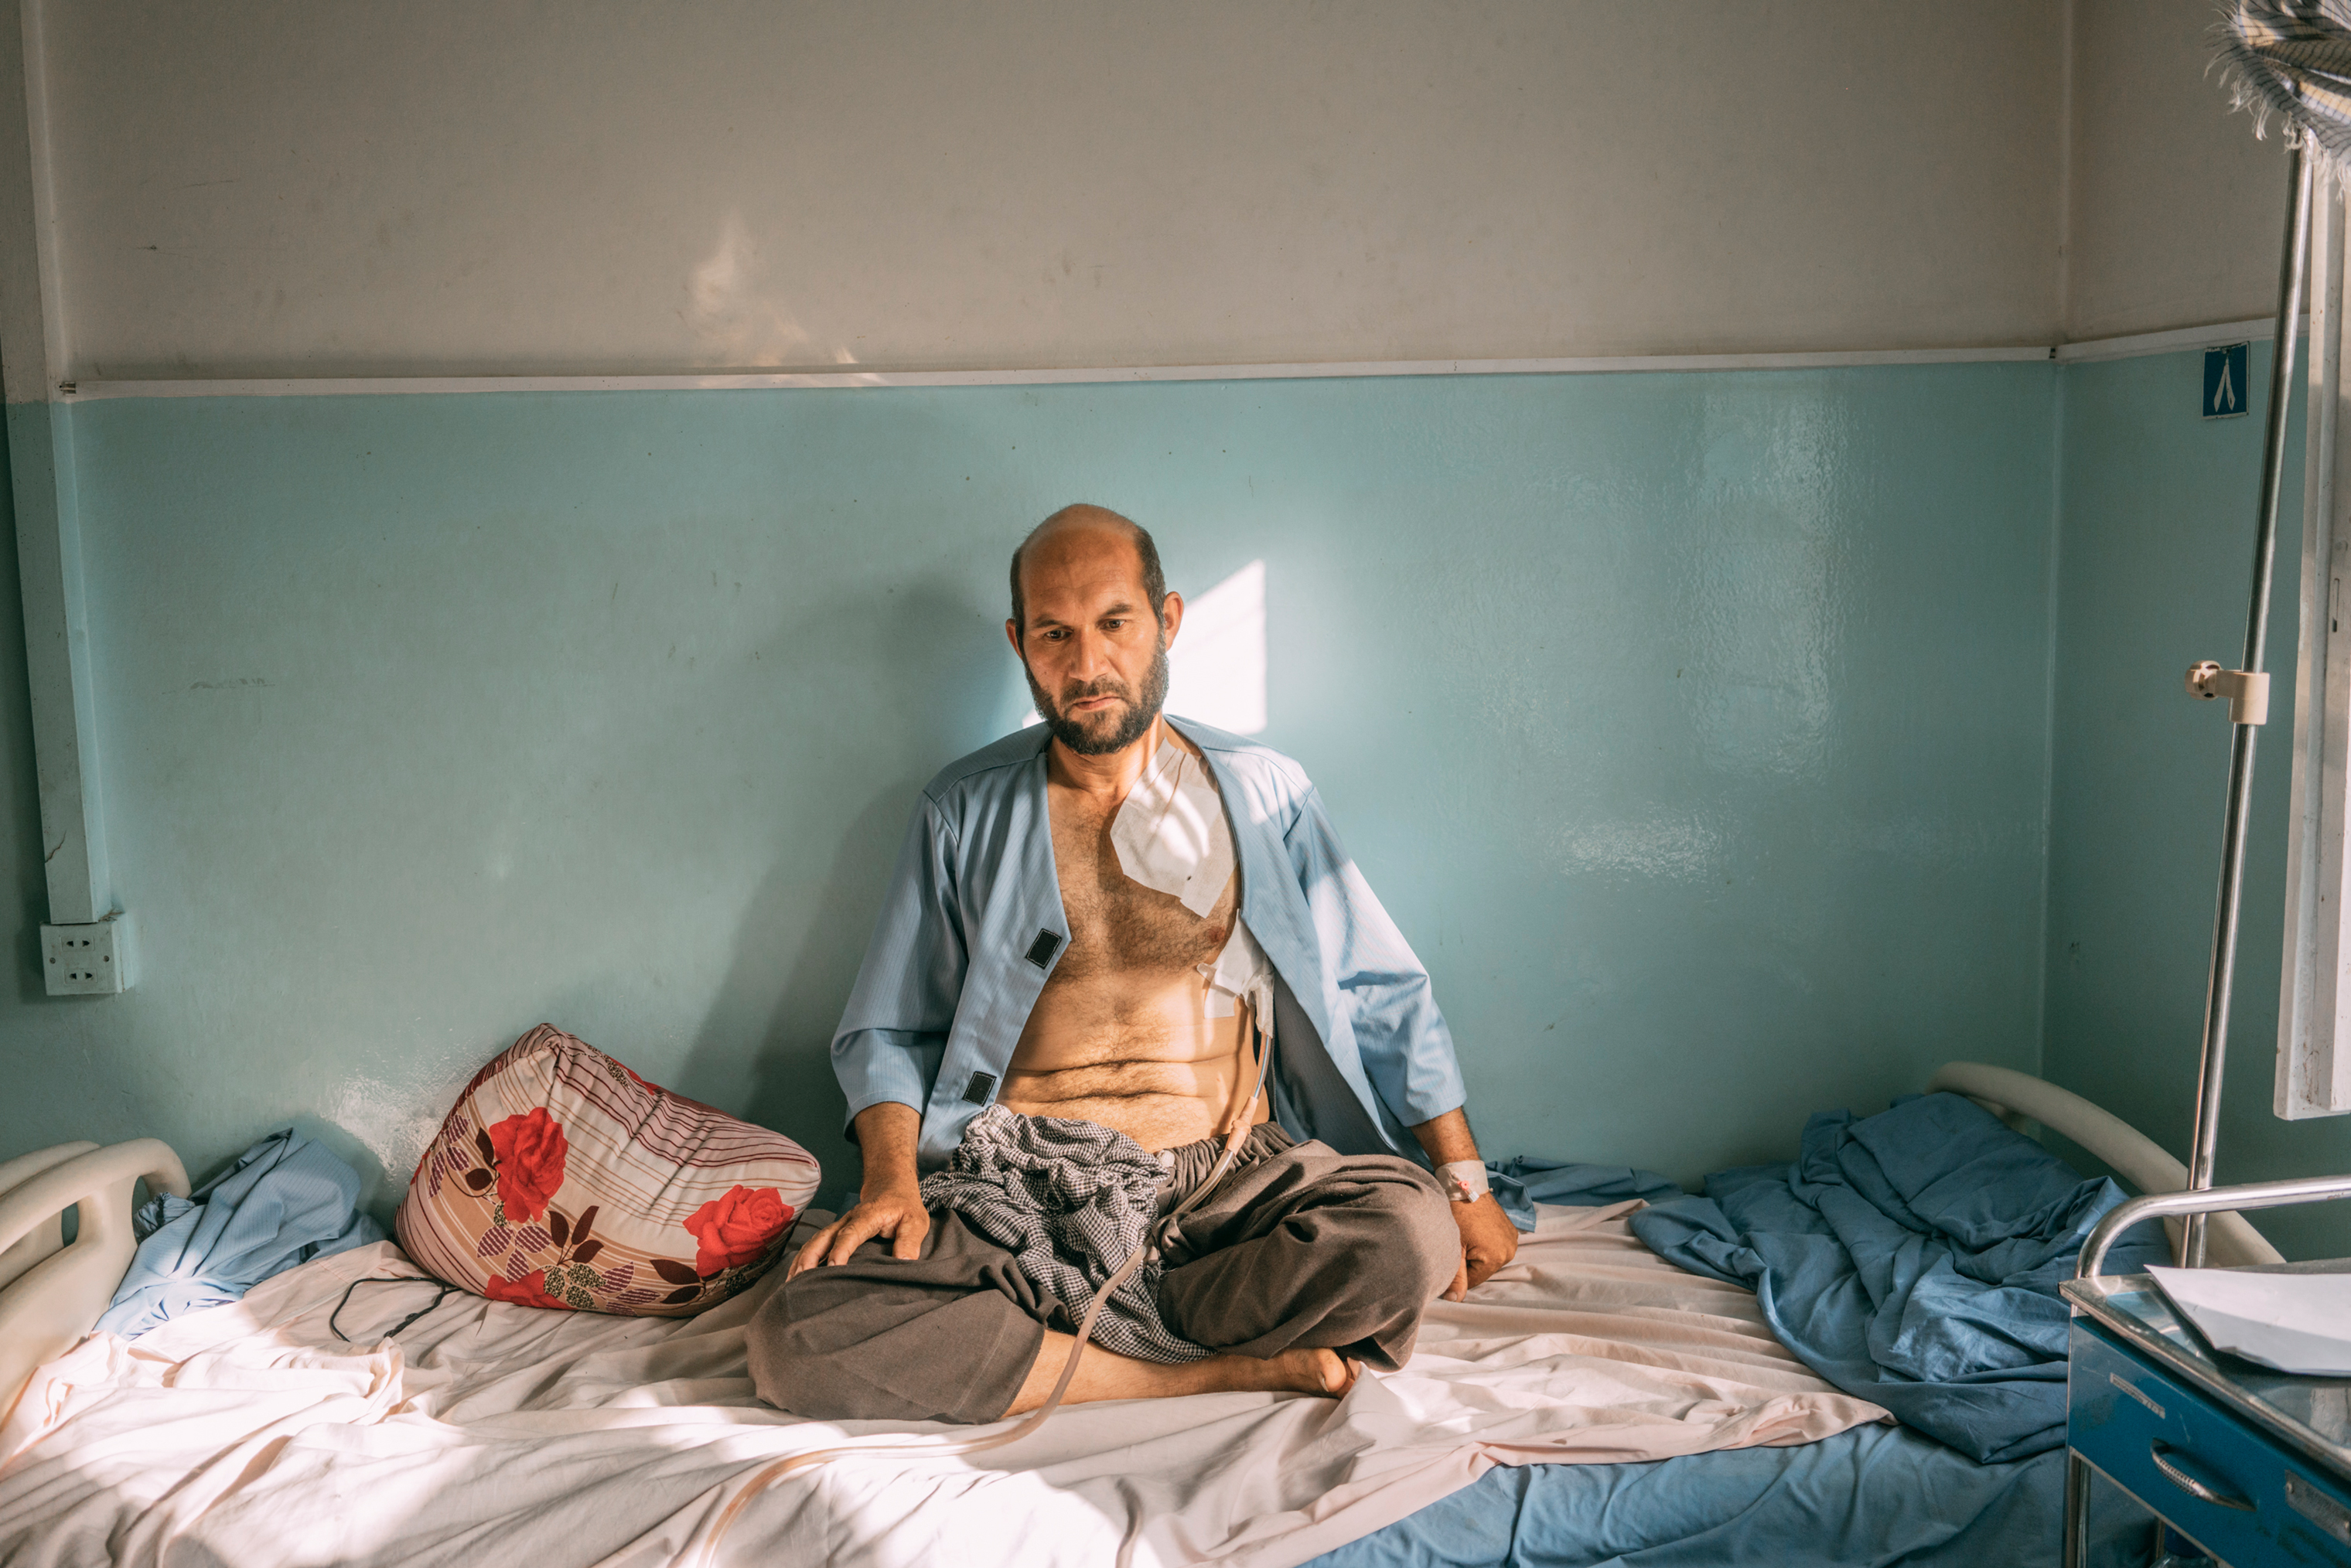 Nakibullah Salwary, 35, who was injured during the Taliban assault on Ghazni, sits on a hospital bed on Aug. 16. (Emanuele Satolli for TIME)